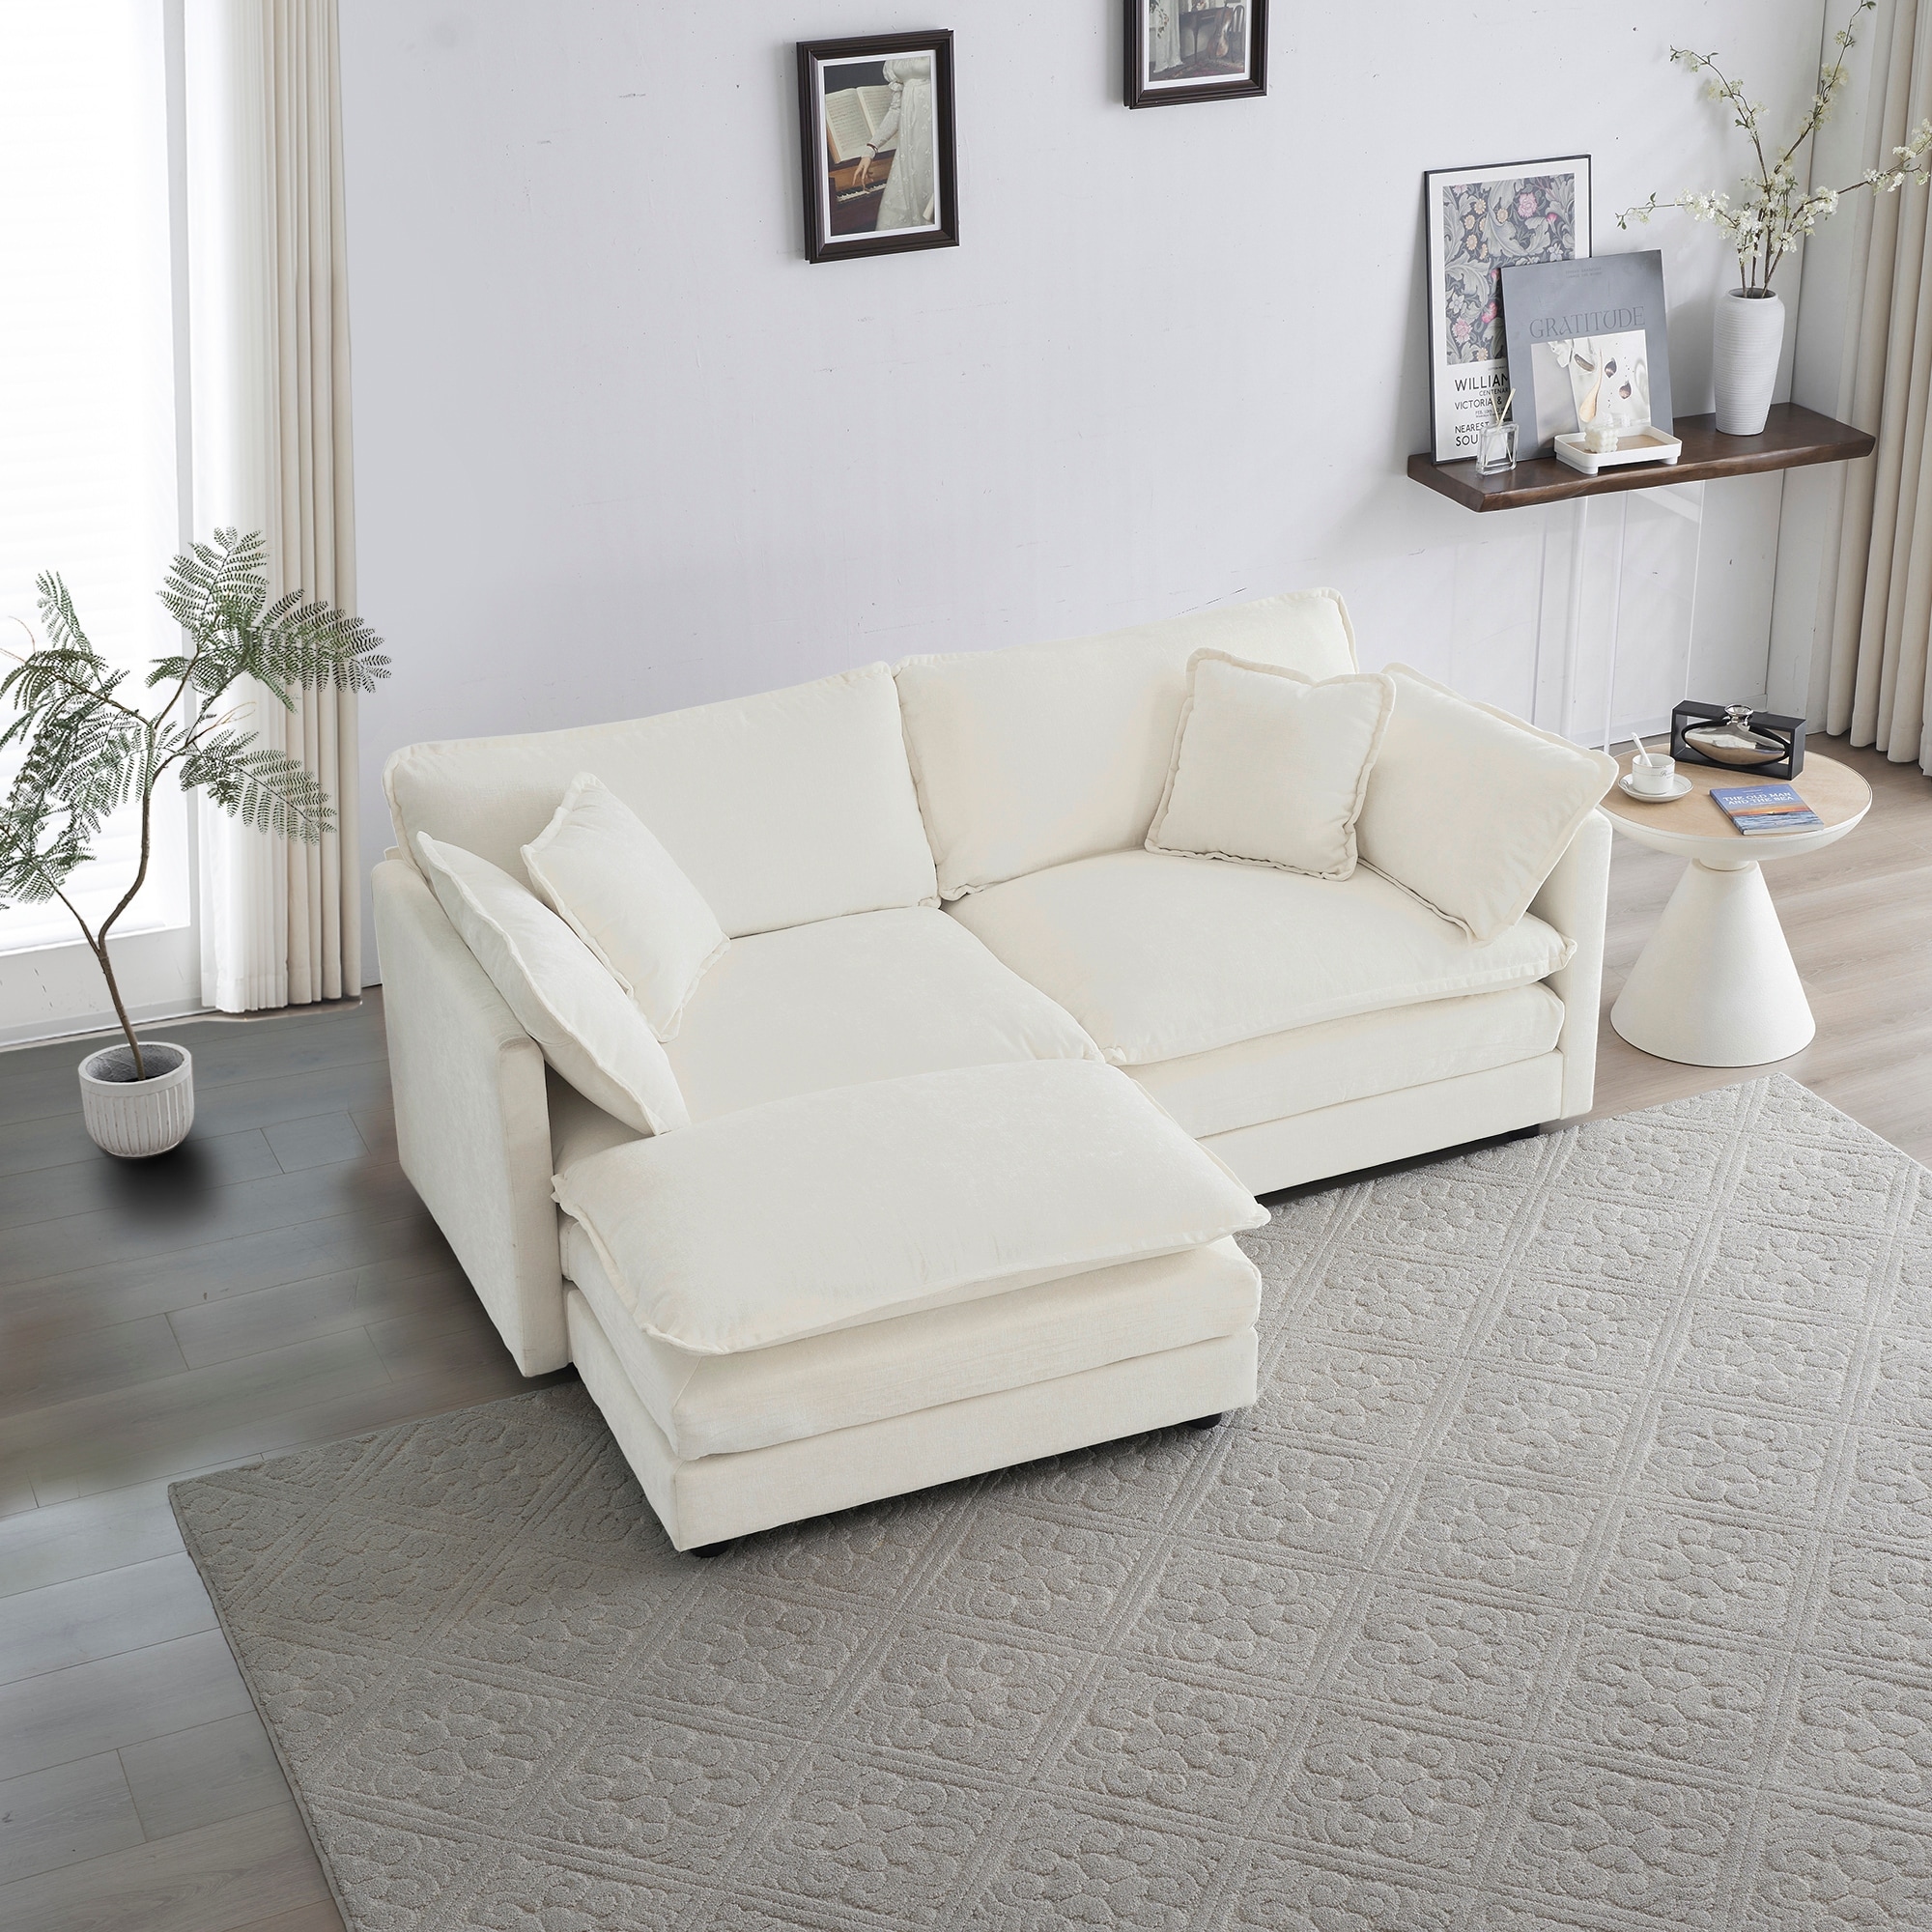 White Sectional Sofas - Bed Bath & Beyond